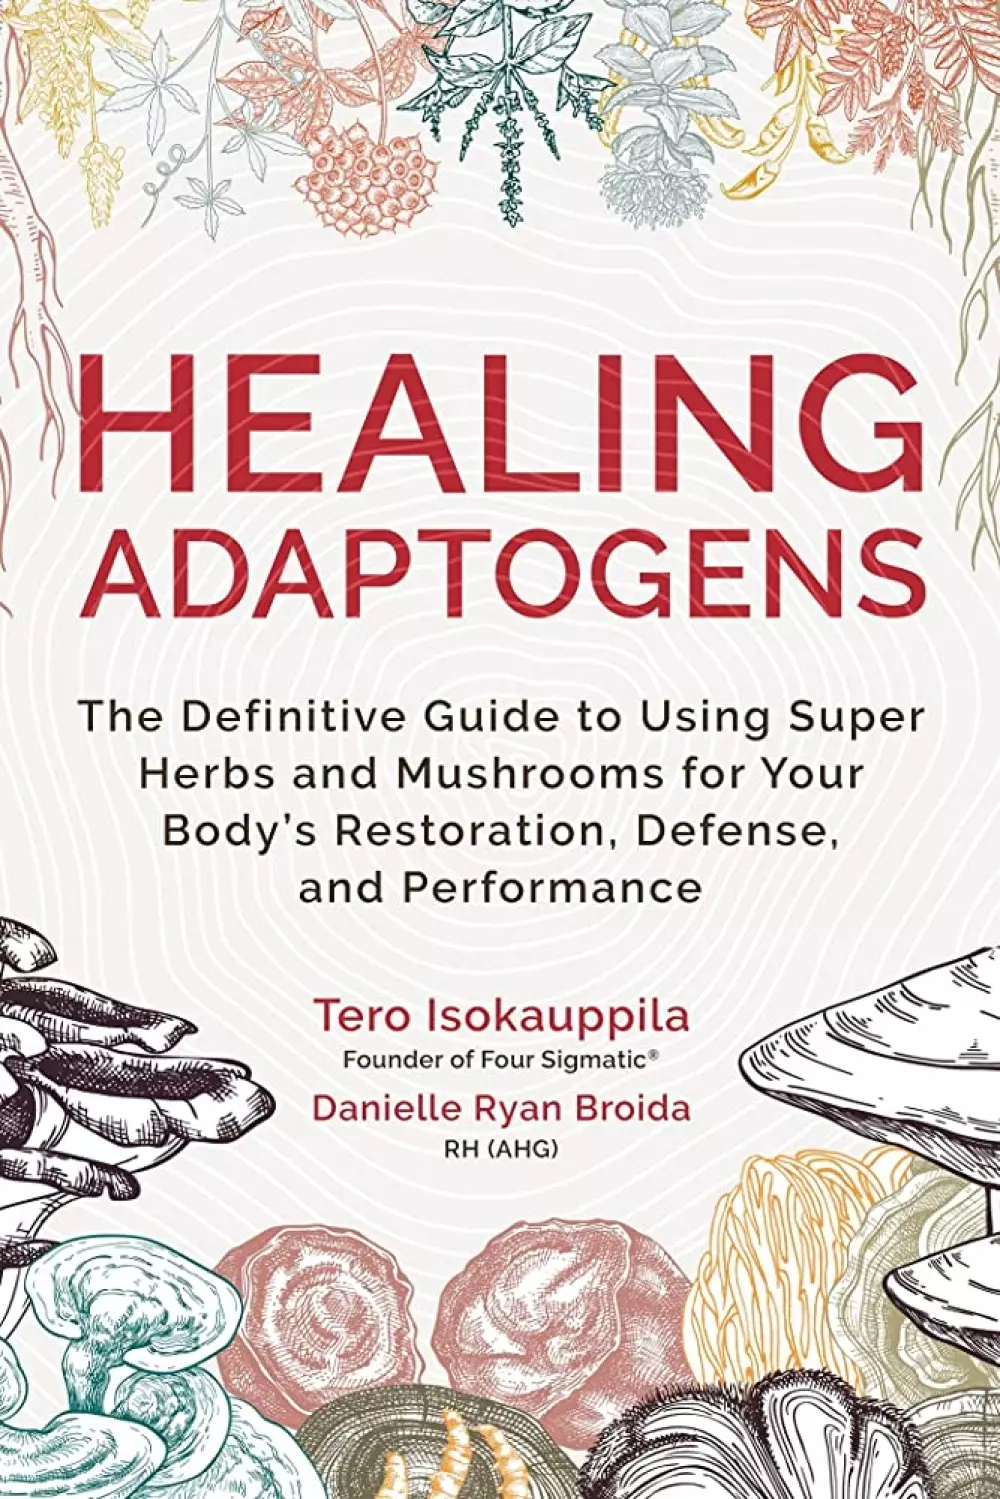 Healing adaptogens, Bøker, Healing, meditasjon & helse, The Definitive Guide to Using Super Herbs and Mushrooms for Your Body's Restoration, Defense, and Performance